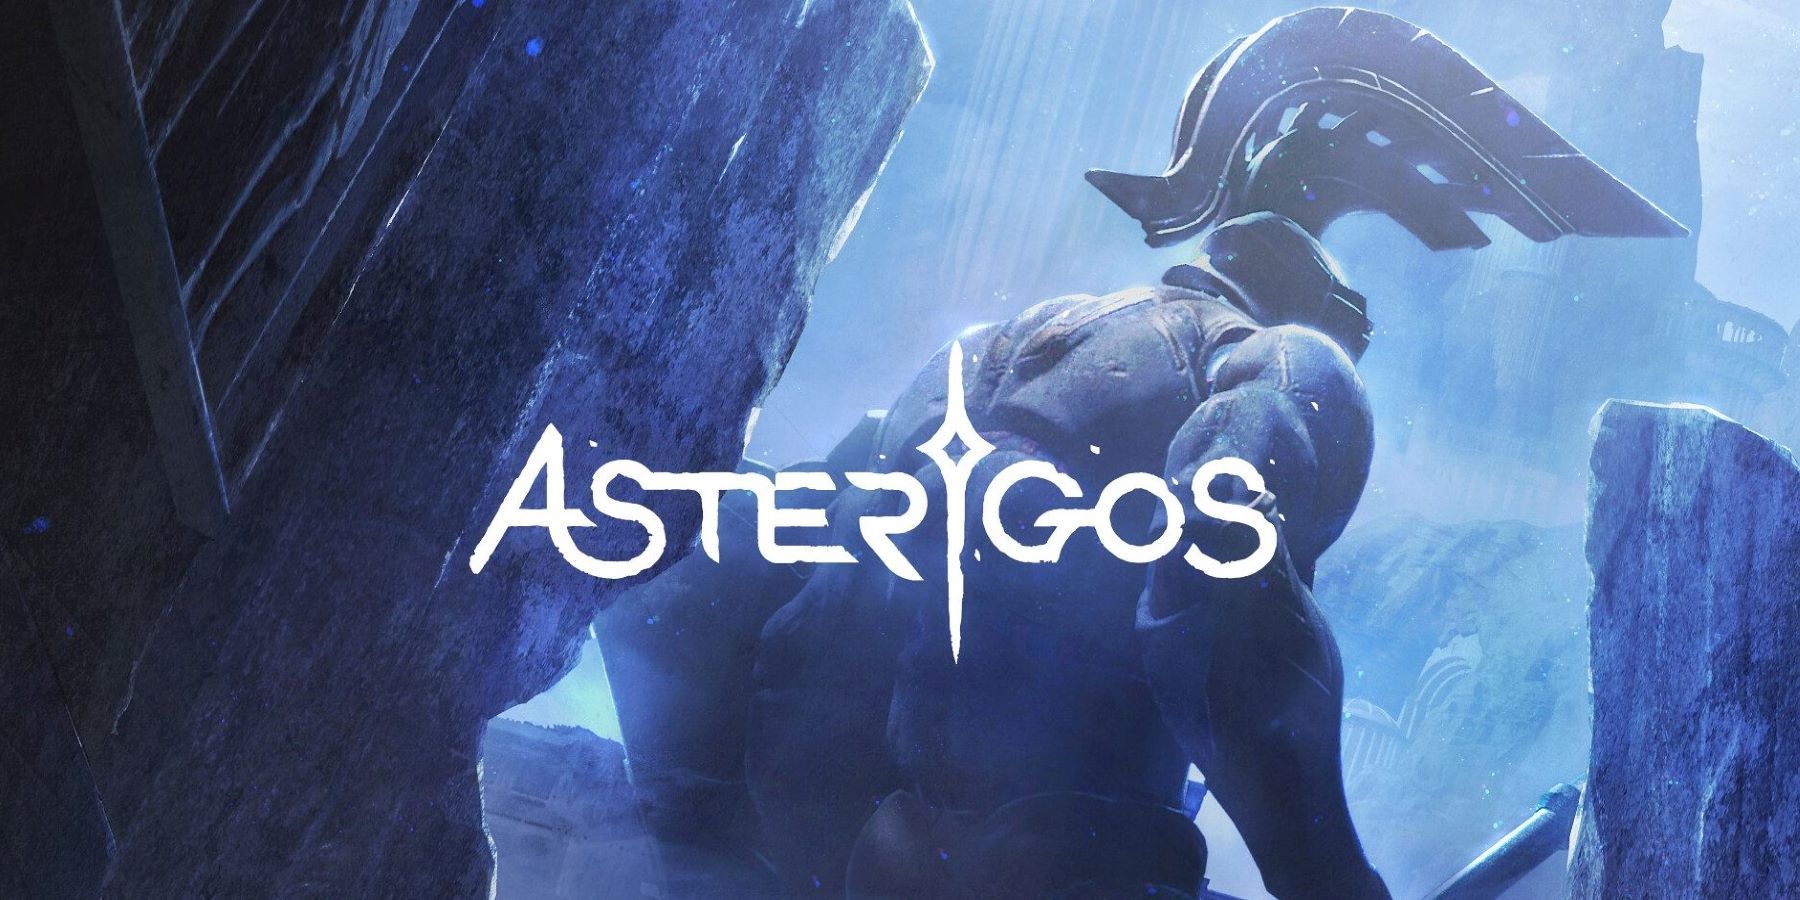 Asterigos logo with a giant warrior in the background